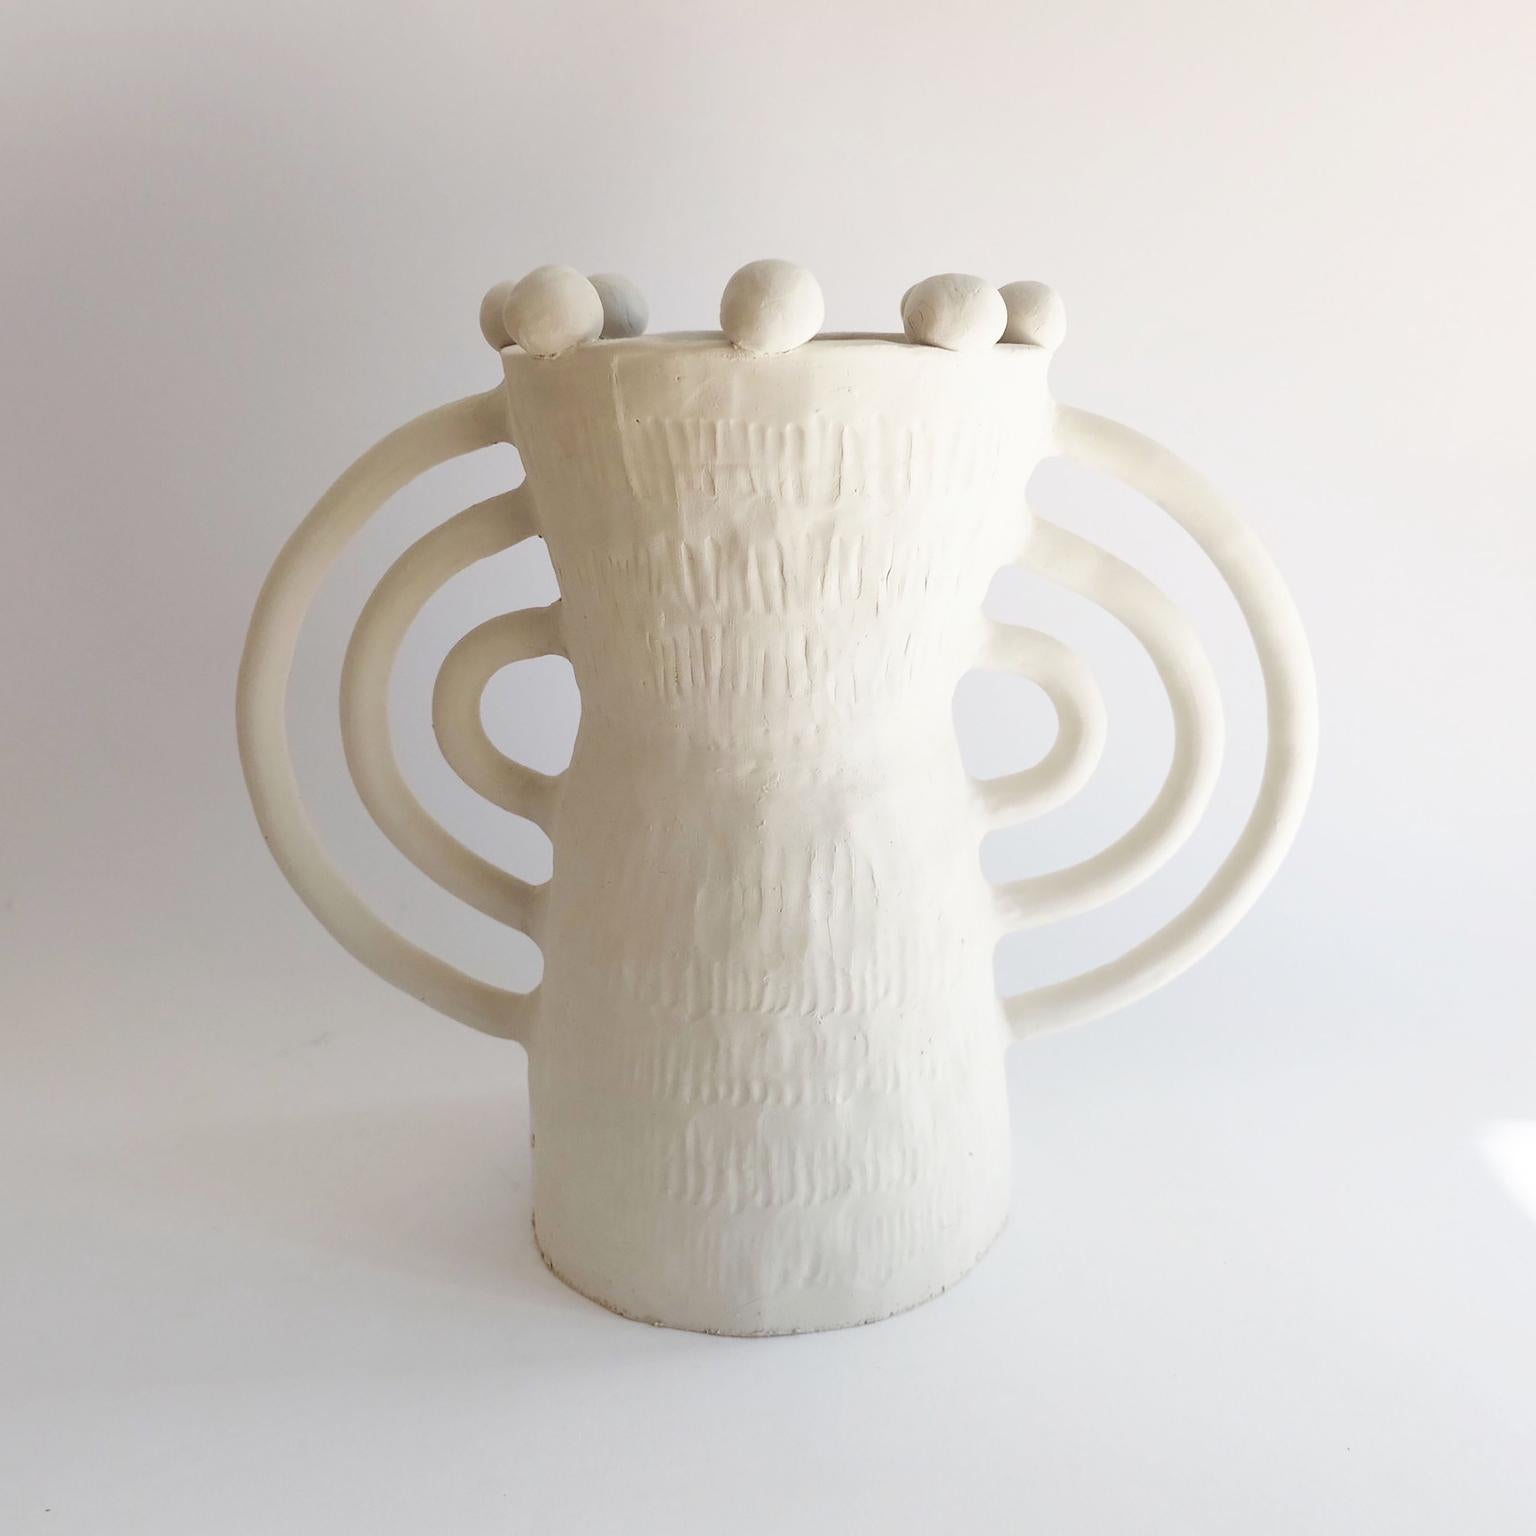 Handsculped Alcazar table lamp by Ia Kutateladze
Dimensions: W 32 x H 26 cm
Materials: Raw white clay

Alcazar lamp combines hand-built organic structure, with soft geometric elements and shapes, an object full of character.

IAAI / Ia